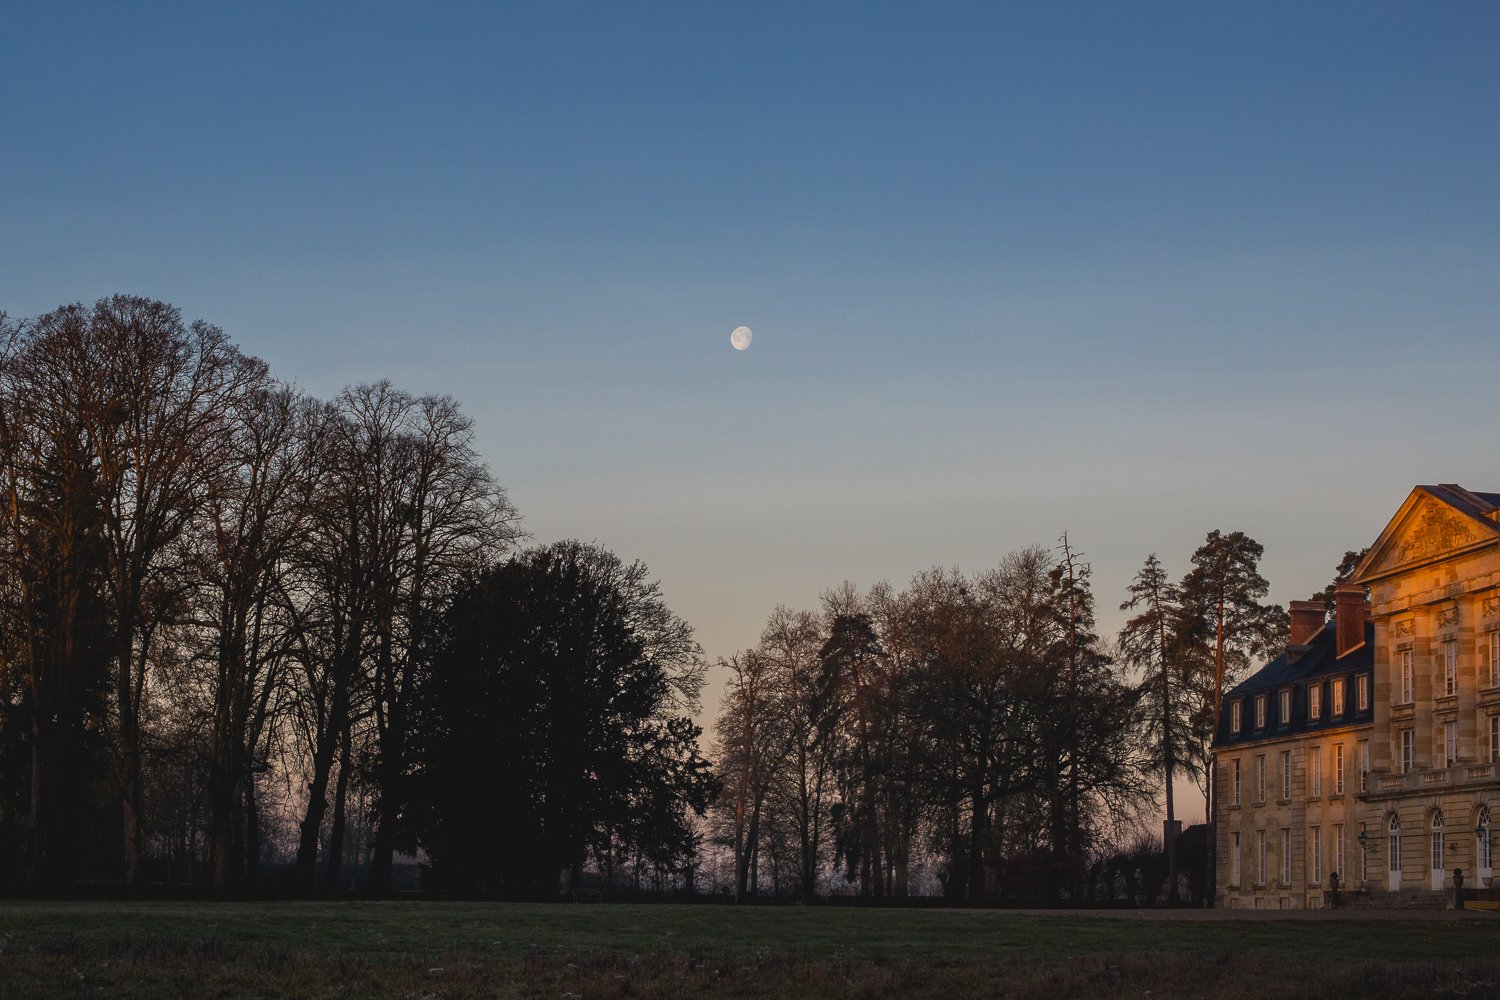 The moon rises over Chateau de Courtomer at dusk during a weekend getaway in France.